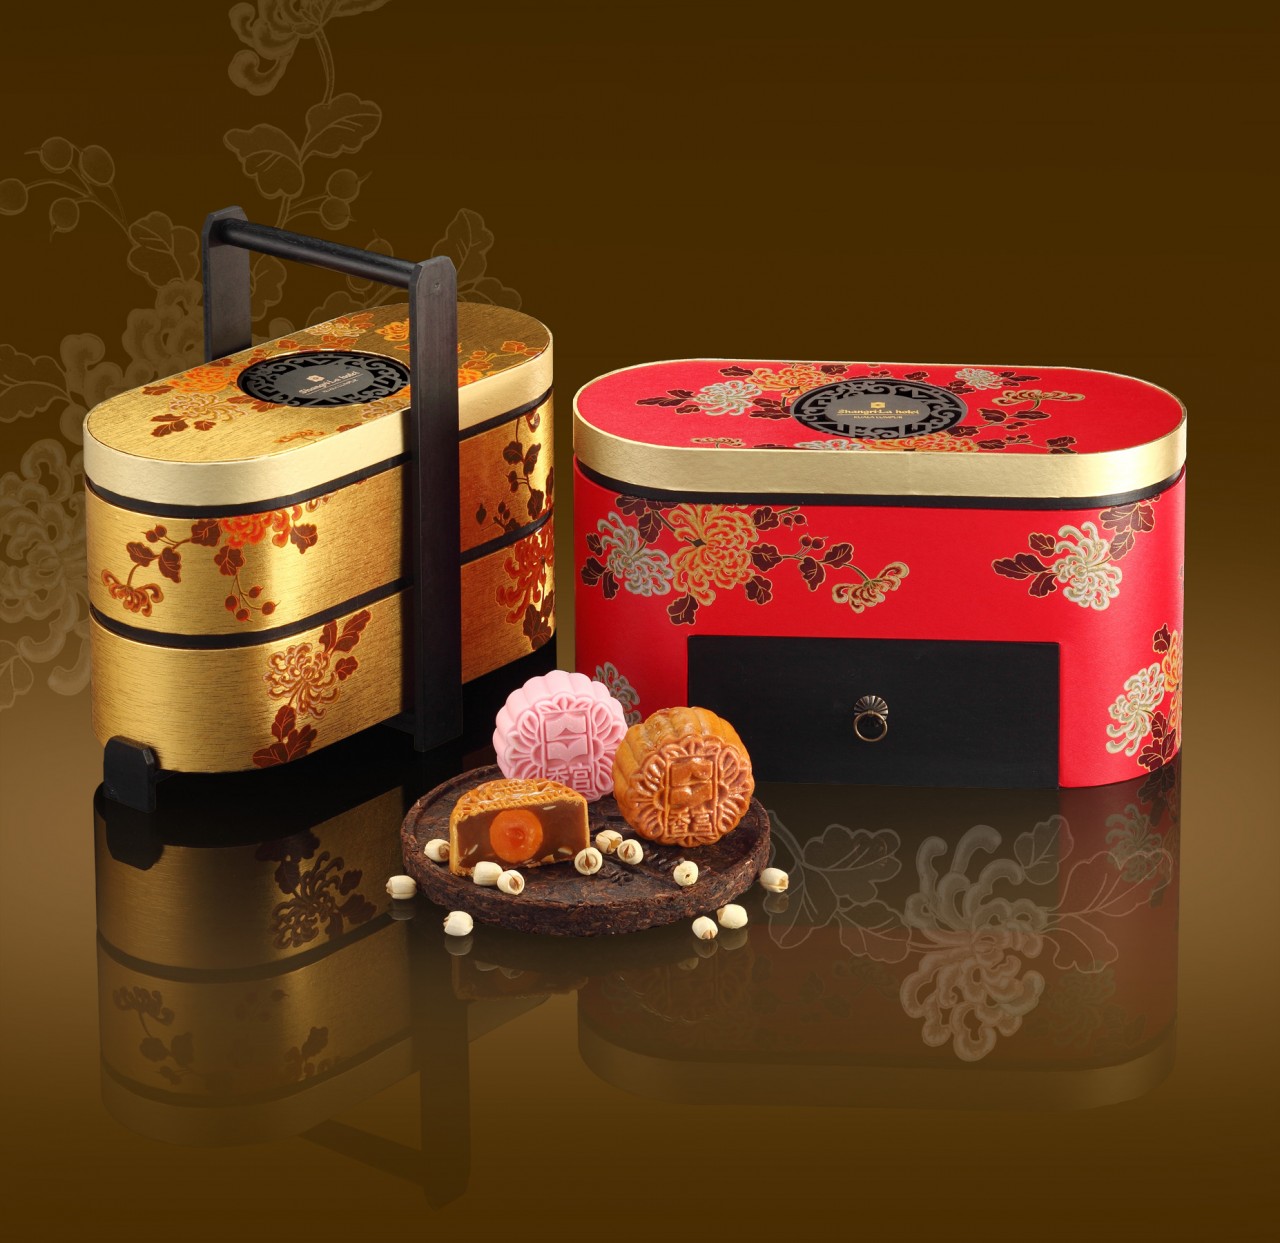 1. A variety of mooncakes are available at Shangri La Hotel Kuala Lumpur this Mid autumn festival